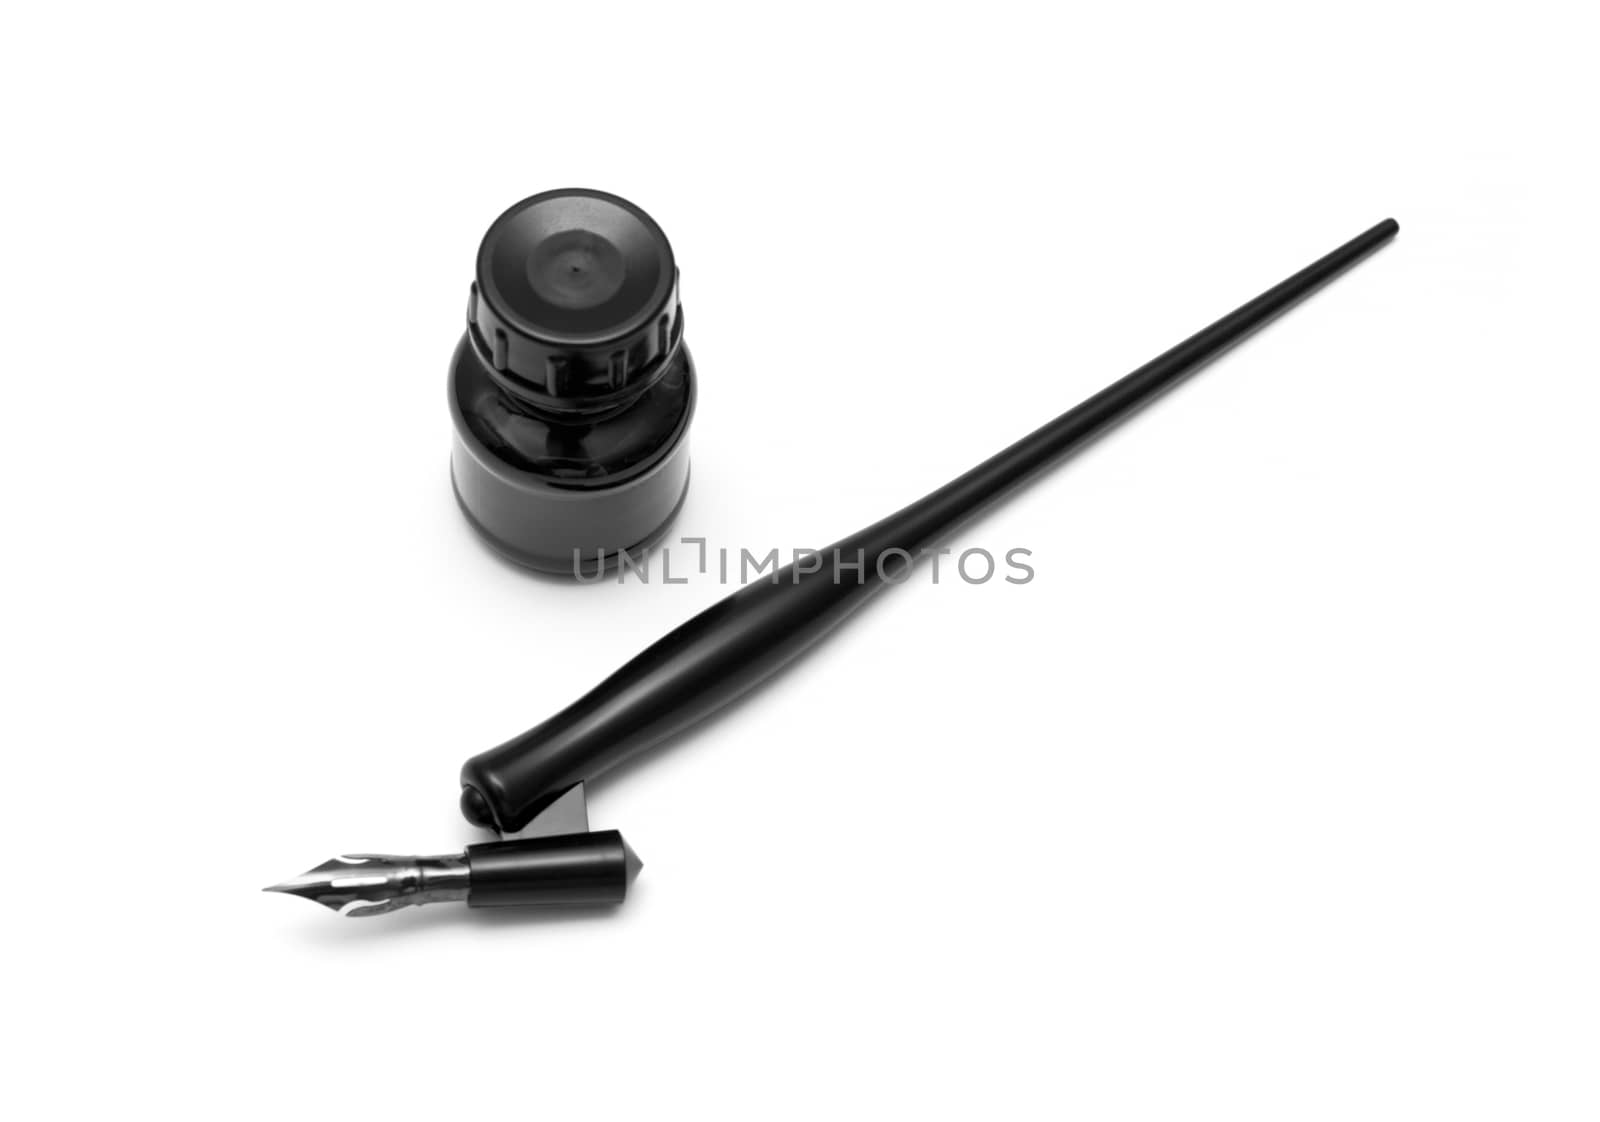 calligraphy pen isolated on white background by DNKSTUDIO